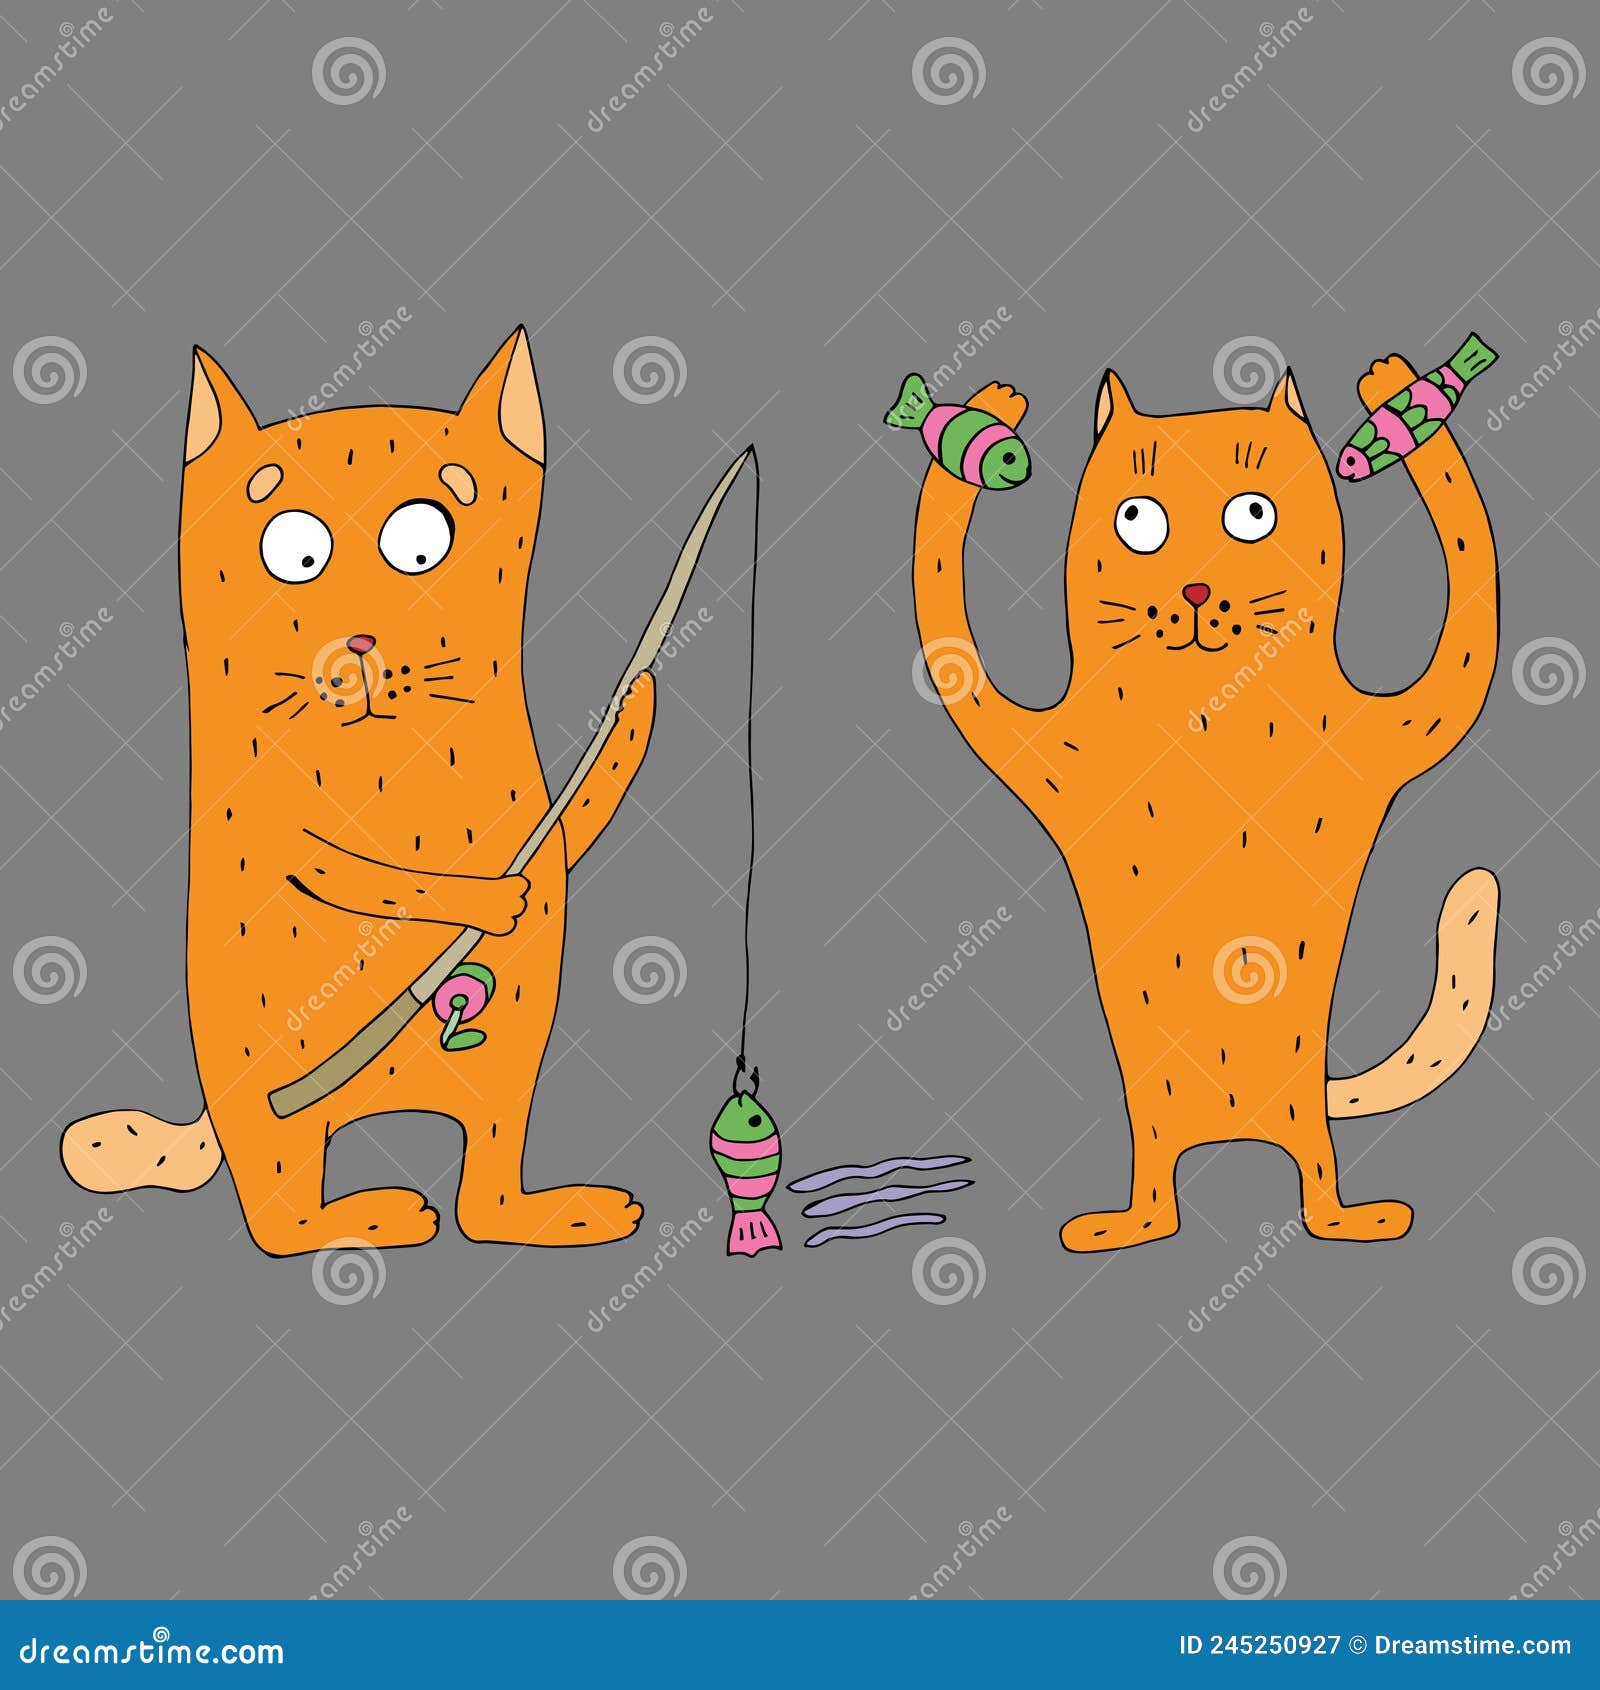 https://thumbs.dreamstime.com/z/red-cats-fishing-funny-cat-rod-his-hands-catches-fish-vector-illustration-comics-coloring-children-adults-245250927.jpg